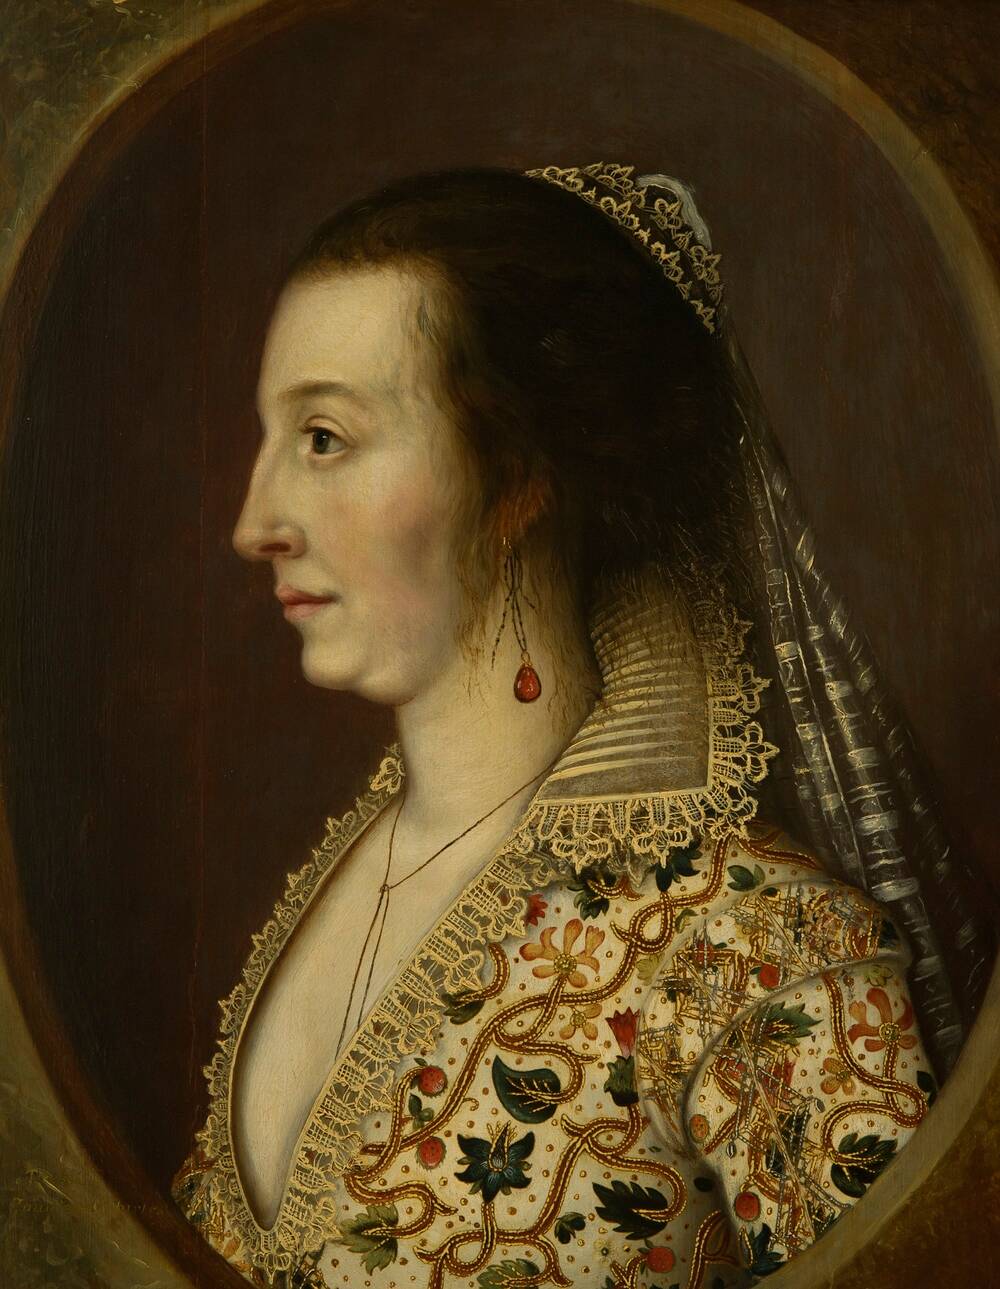 An oil painting of a 17th-century woman, showing her top half. She is smartly dressed in an embroidered jacket with a stiff lace collar. She wears a light veil in her hair and drop pearl earrings.